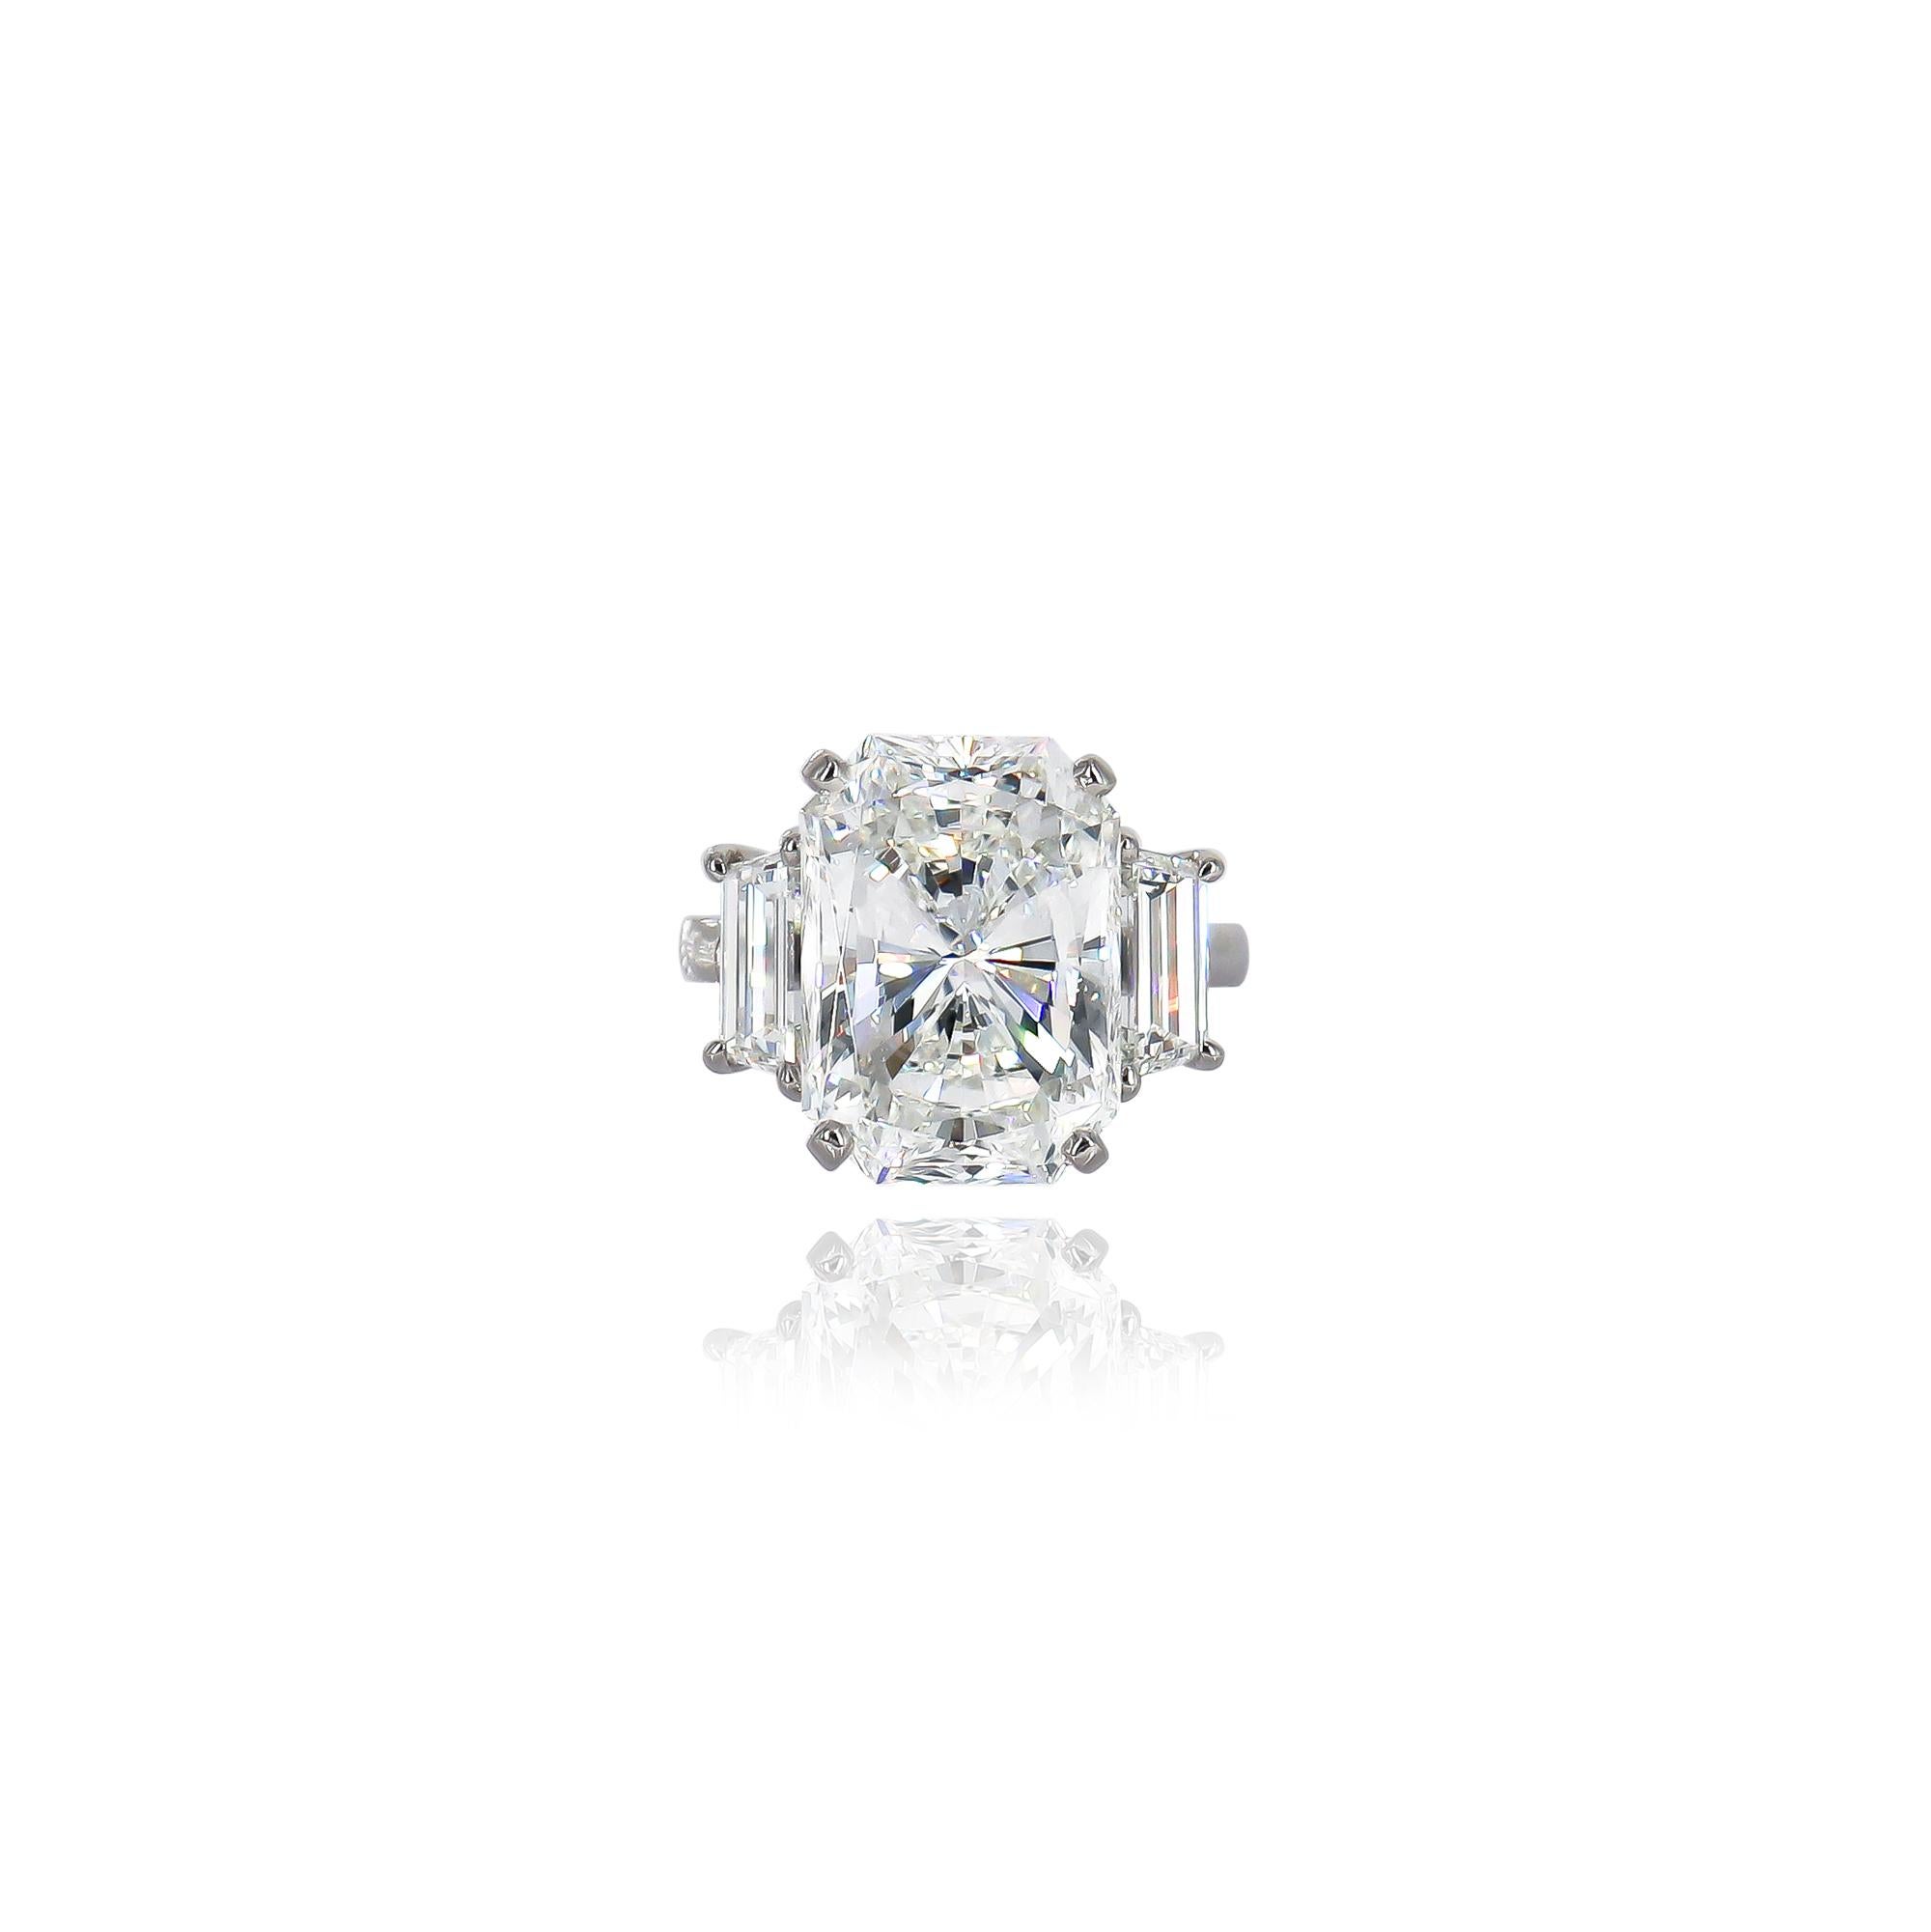 This exquisite, new acquisition by the house of J. Birnbach features a Van Cleef and Arpels 10.03 carat radiant cut diamond of F color and VS2 clarity as described by GIA grading report #1226790135. Set in a signed, platinum, three-stone ring with